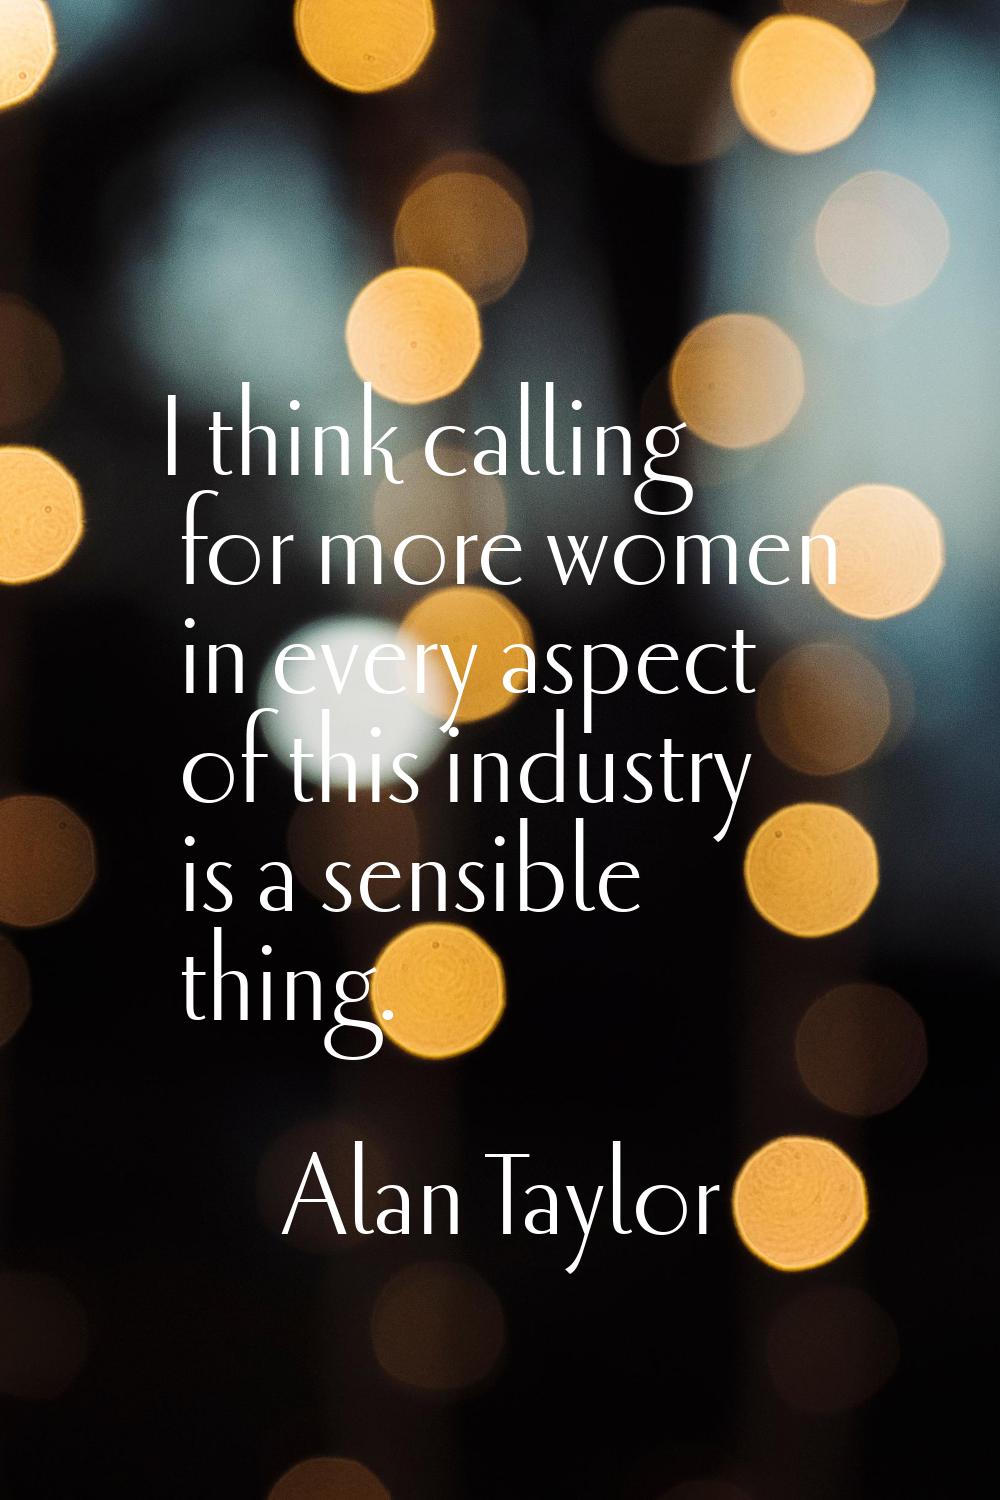 I think calling for more women in every aspect of this industry is a sensible thing.